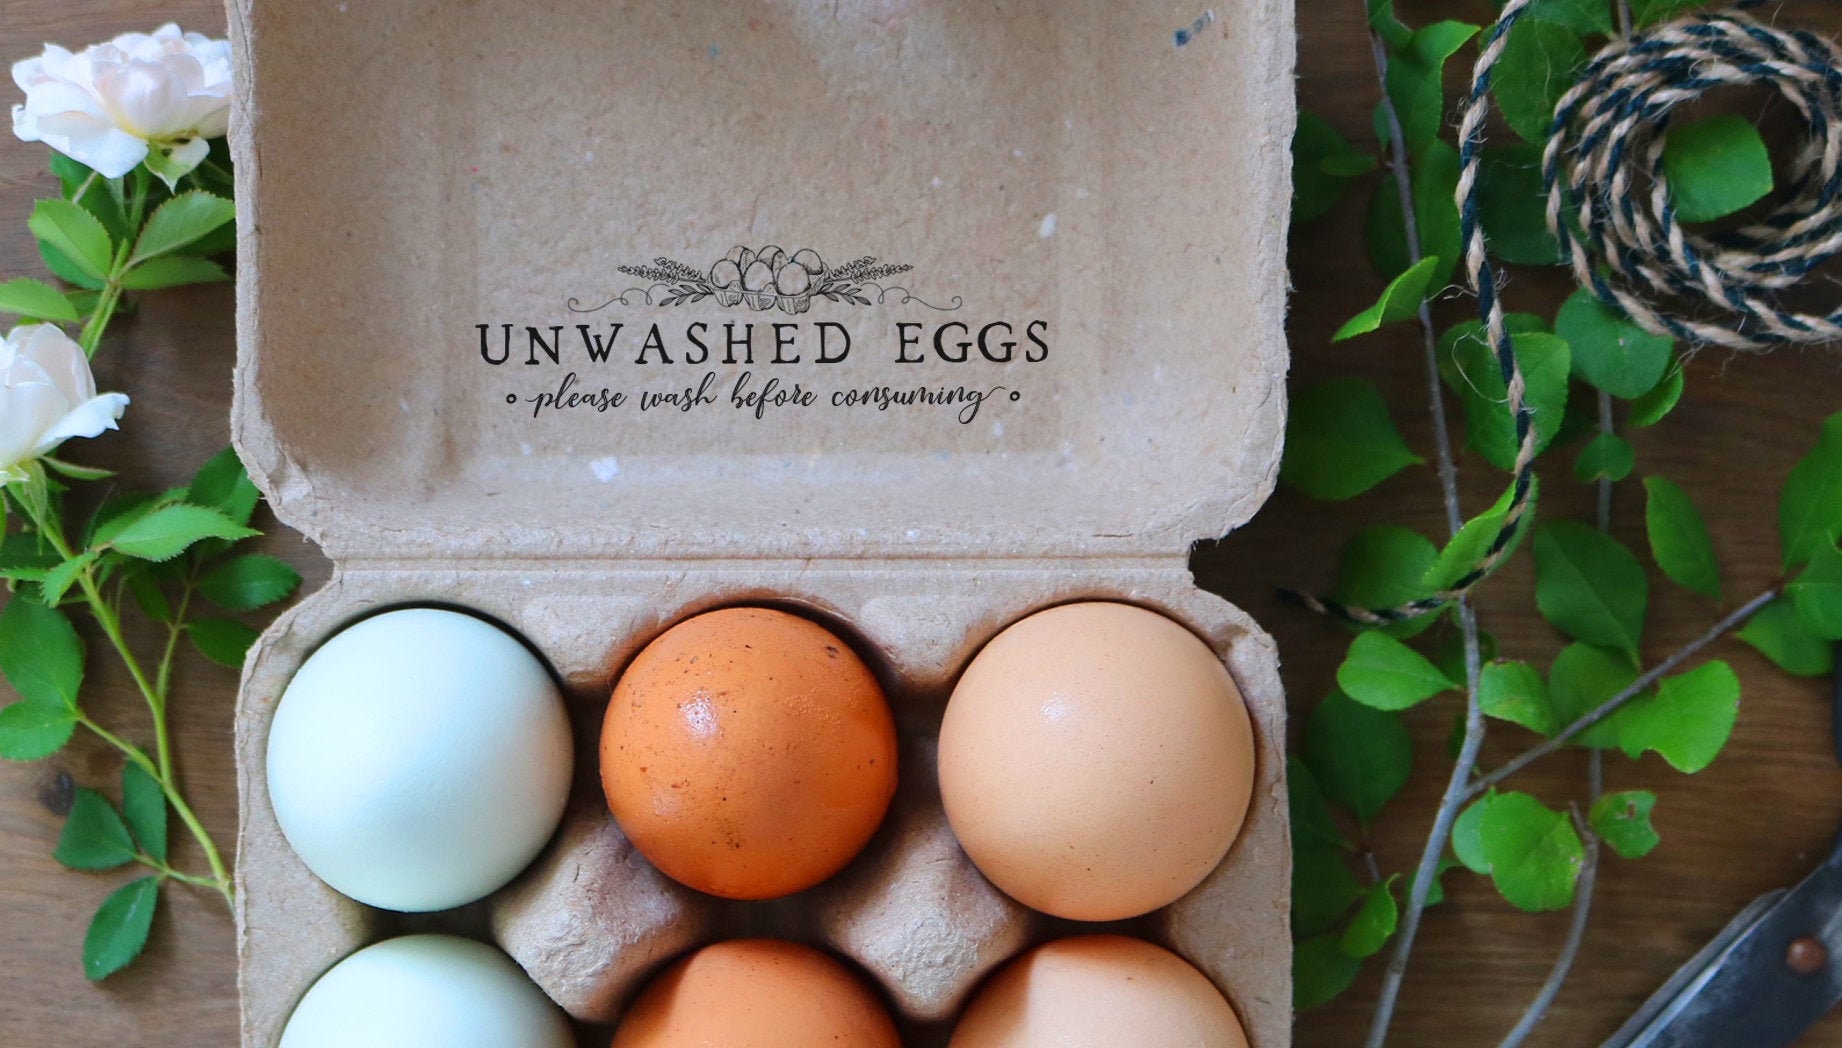 Farm Fresh Eggs with Chicken in Nesting Box Rubber Stamp – Wild Feather Farm